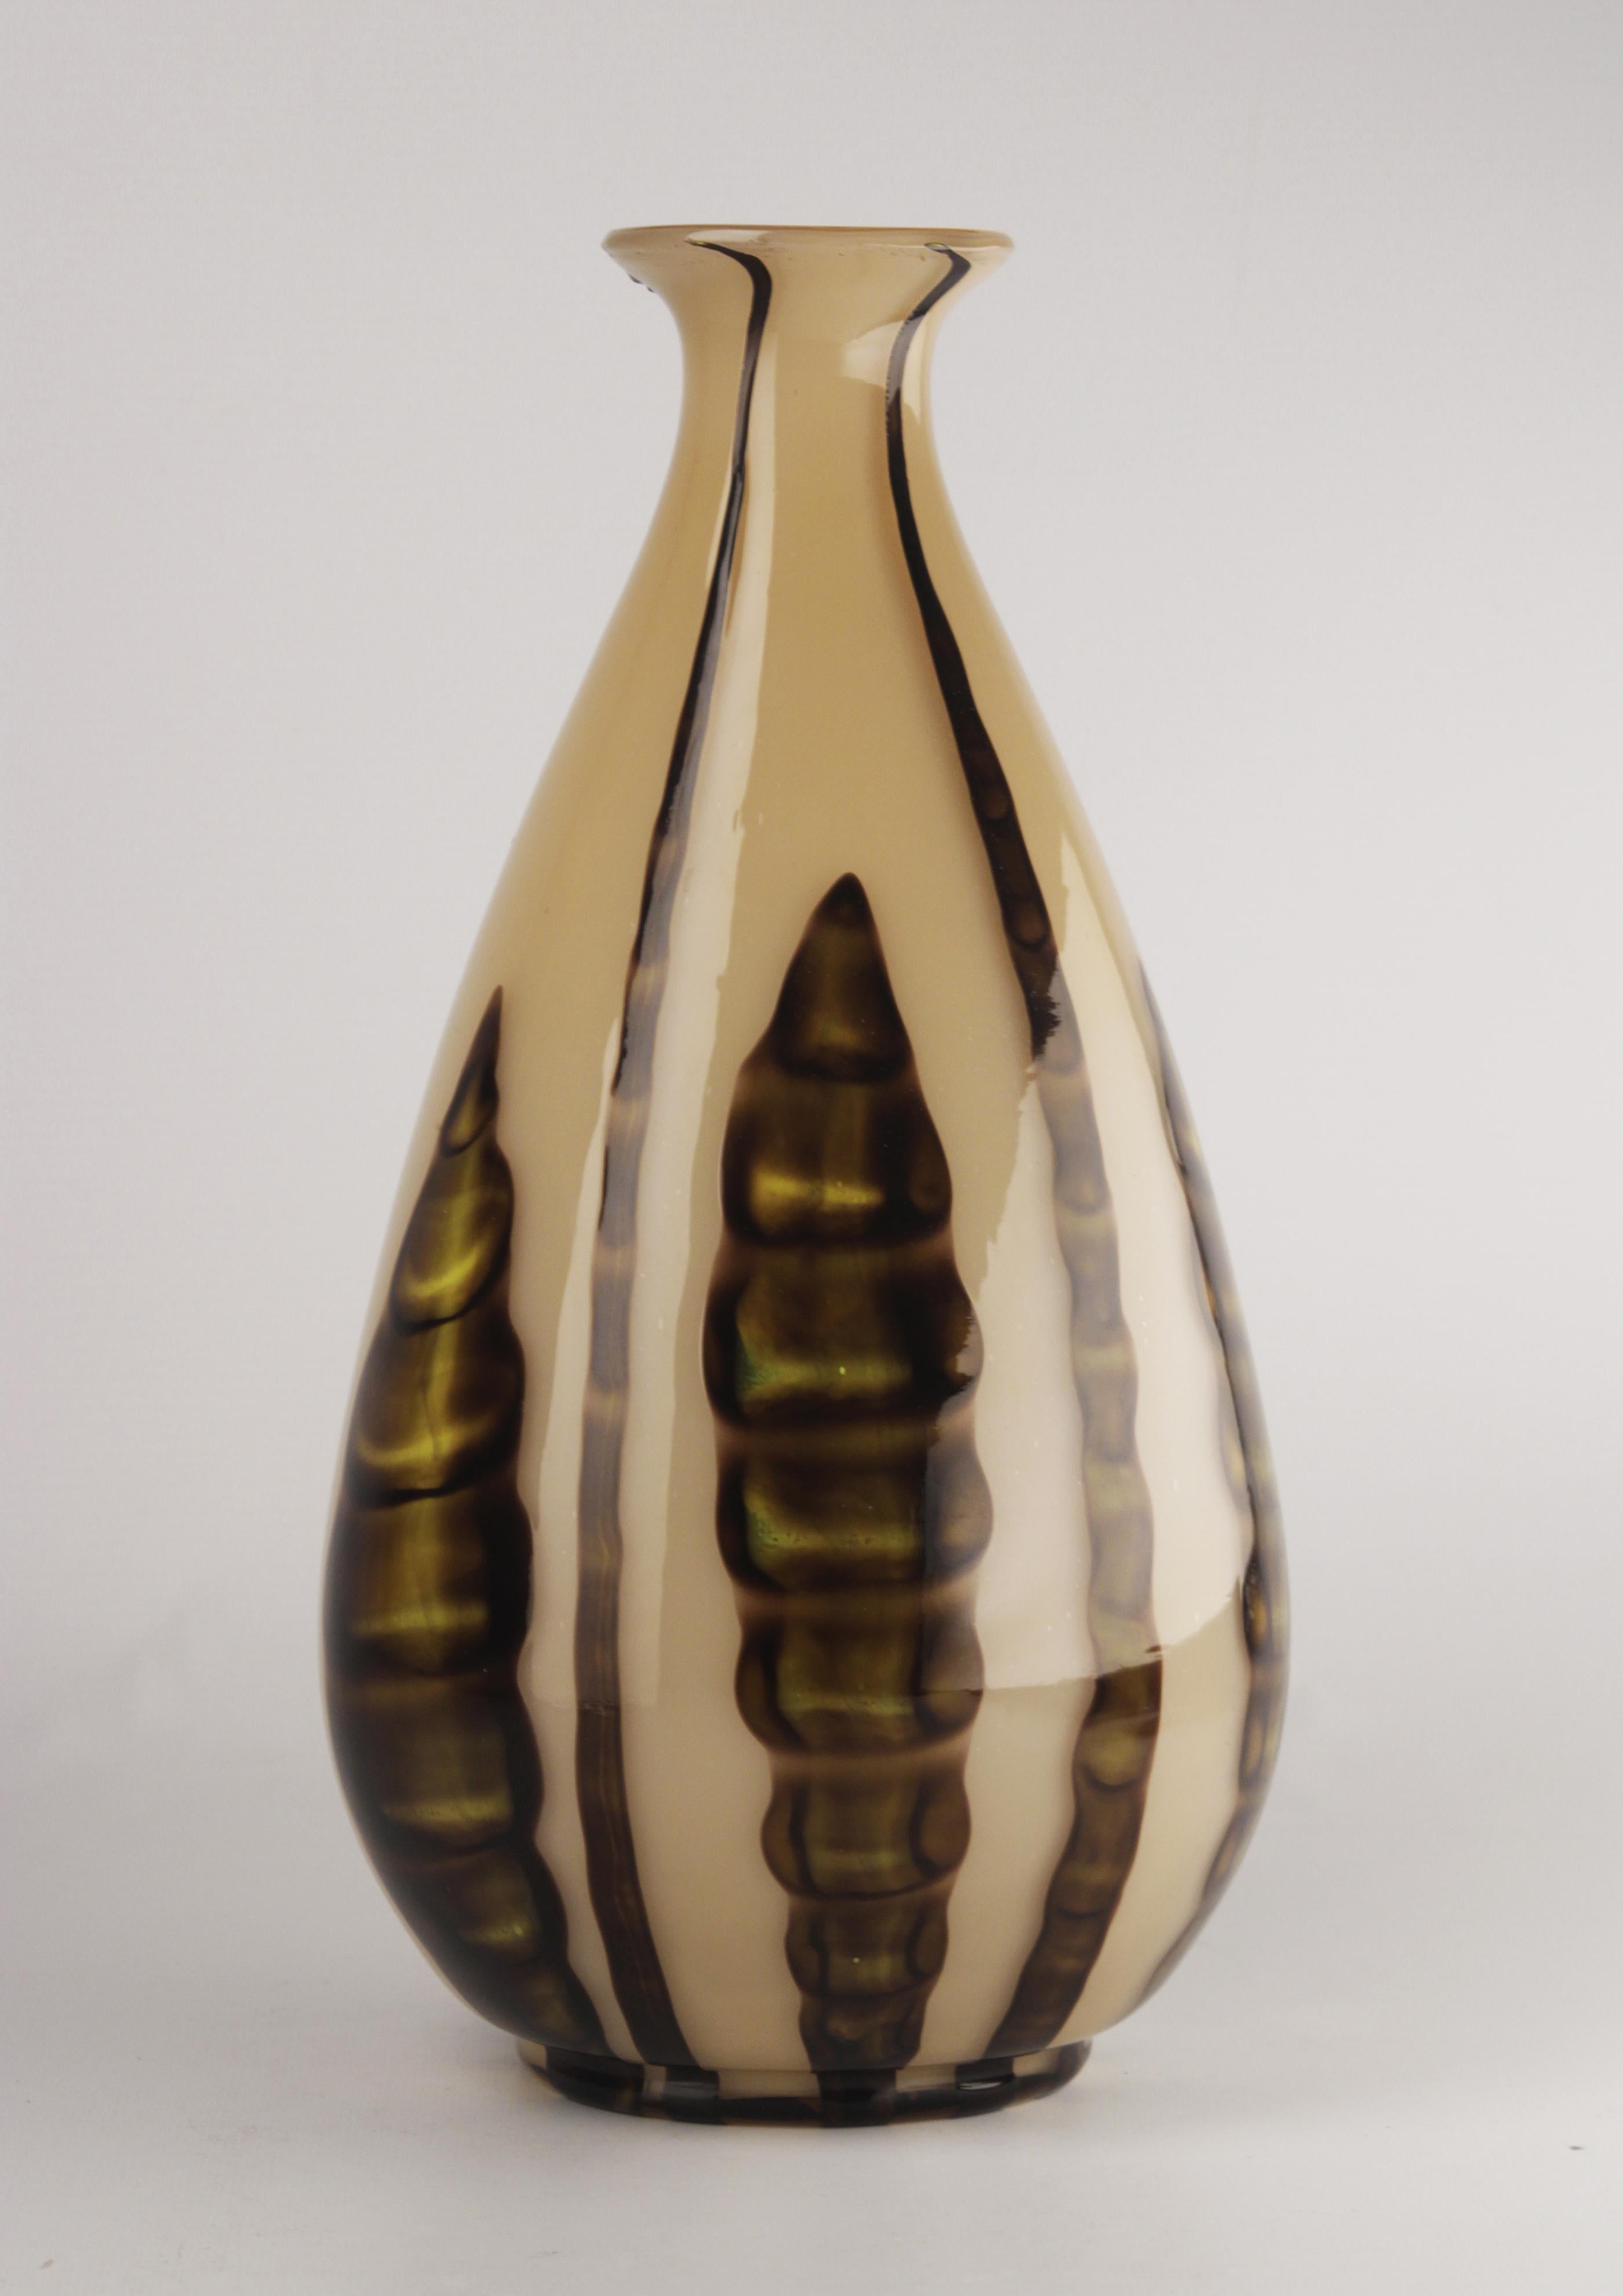 Early 20th century Art Déco czech glazed art glass bulbous vase decorated with plant motifs

By: unknown
Material: glass, art glass
Technique: glazed, cast
Dimensions: 8 in x 13 in
Date: early 20th century
Style: Art Déco
Place of origin: Czech